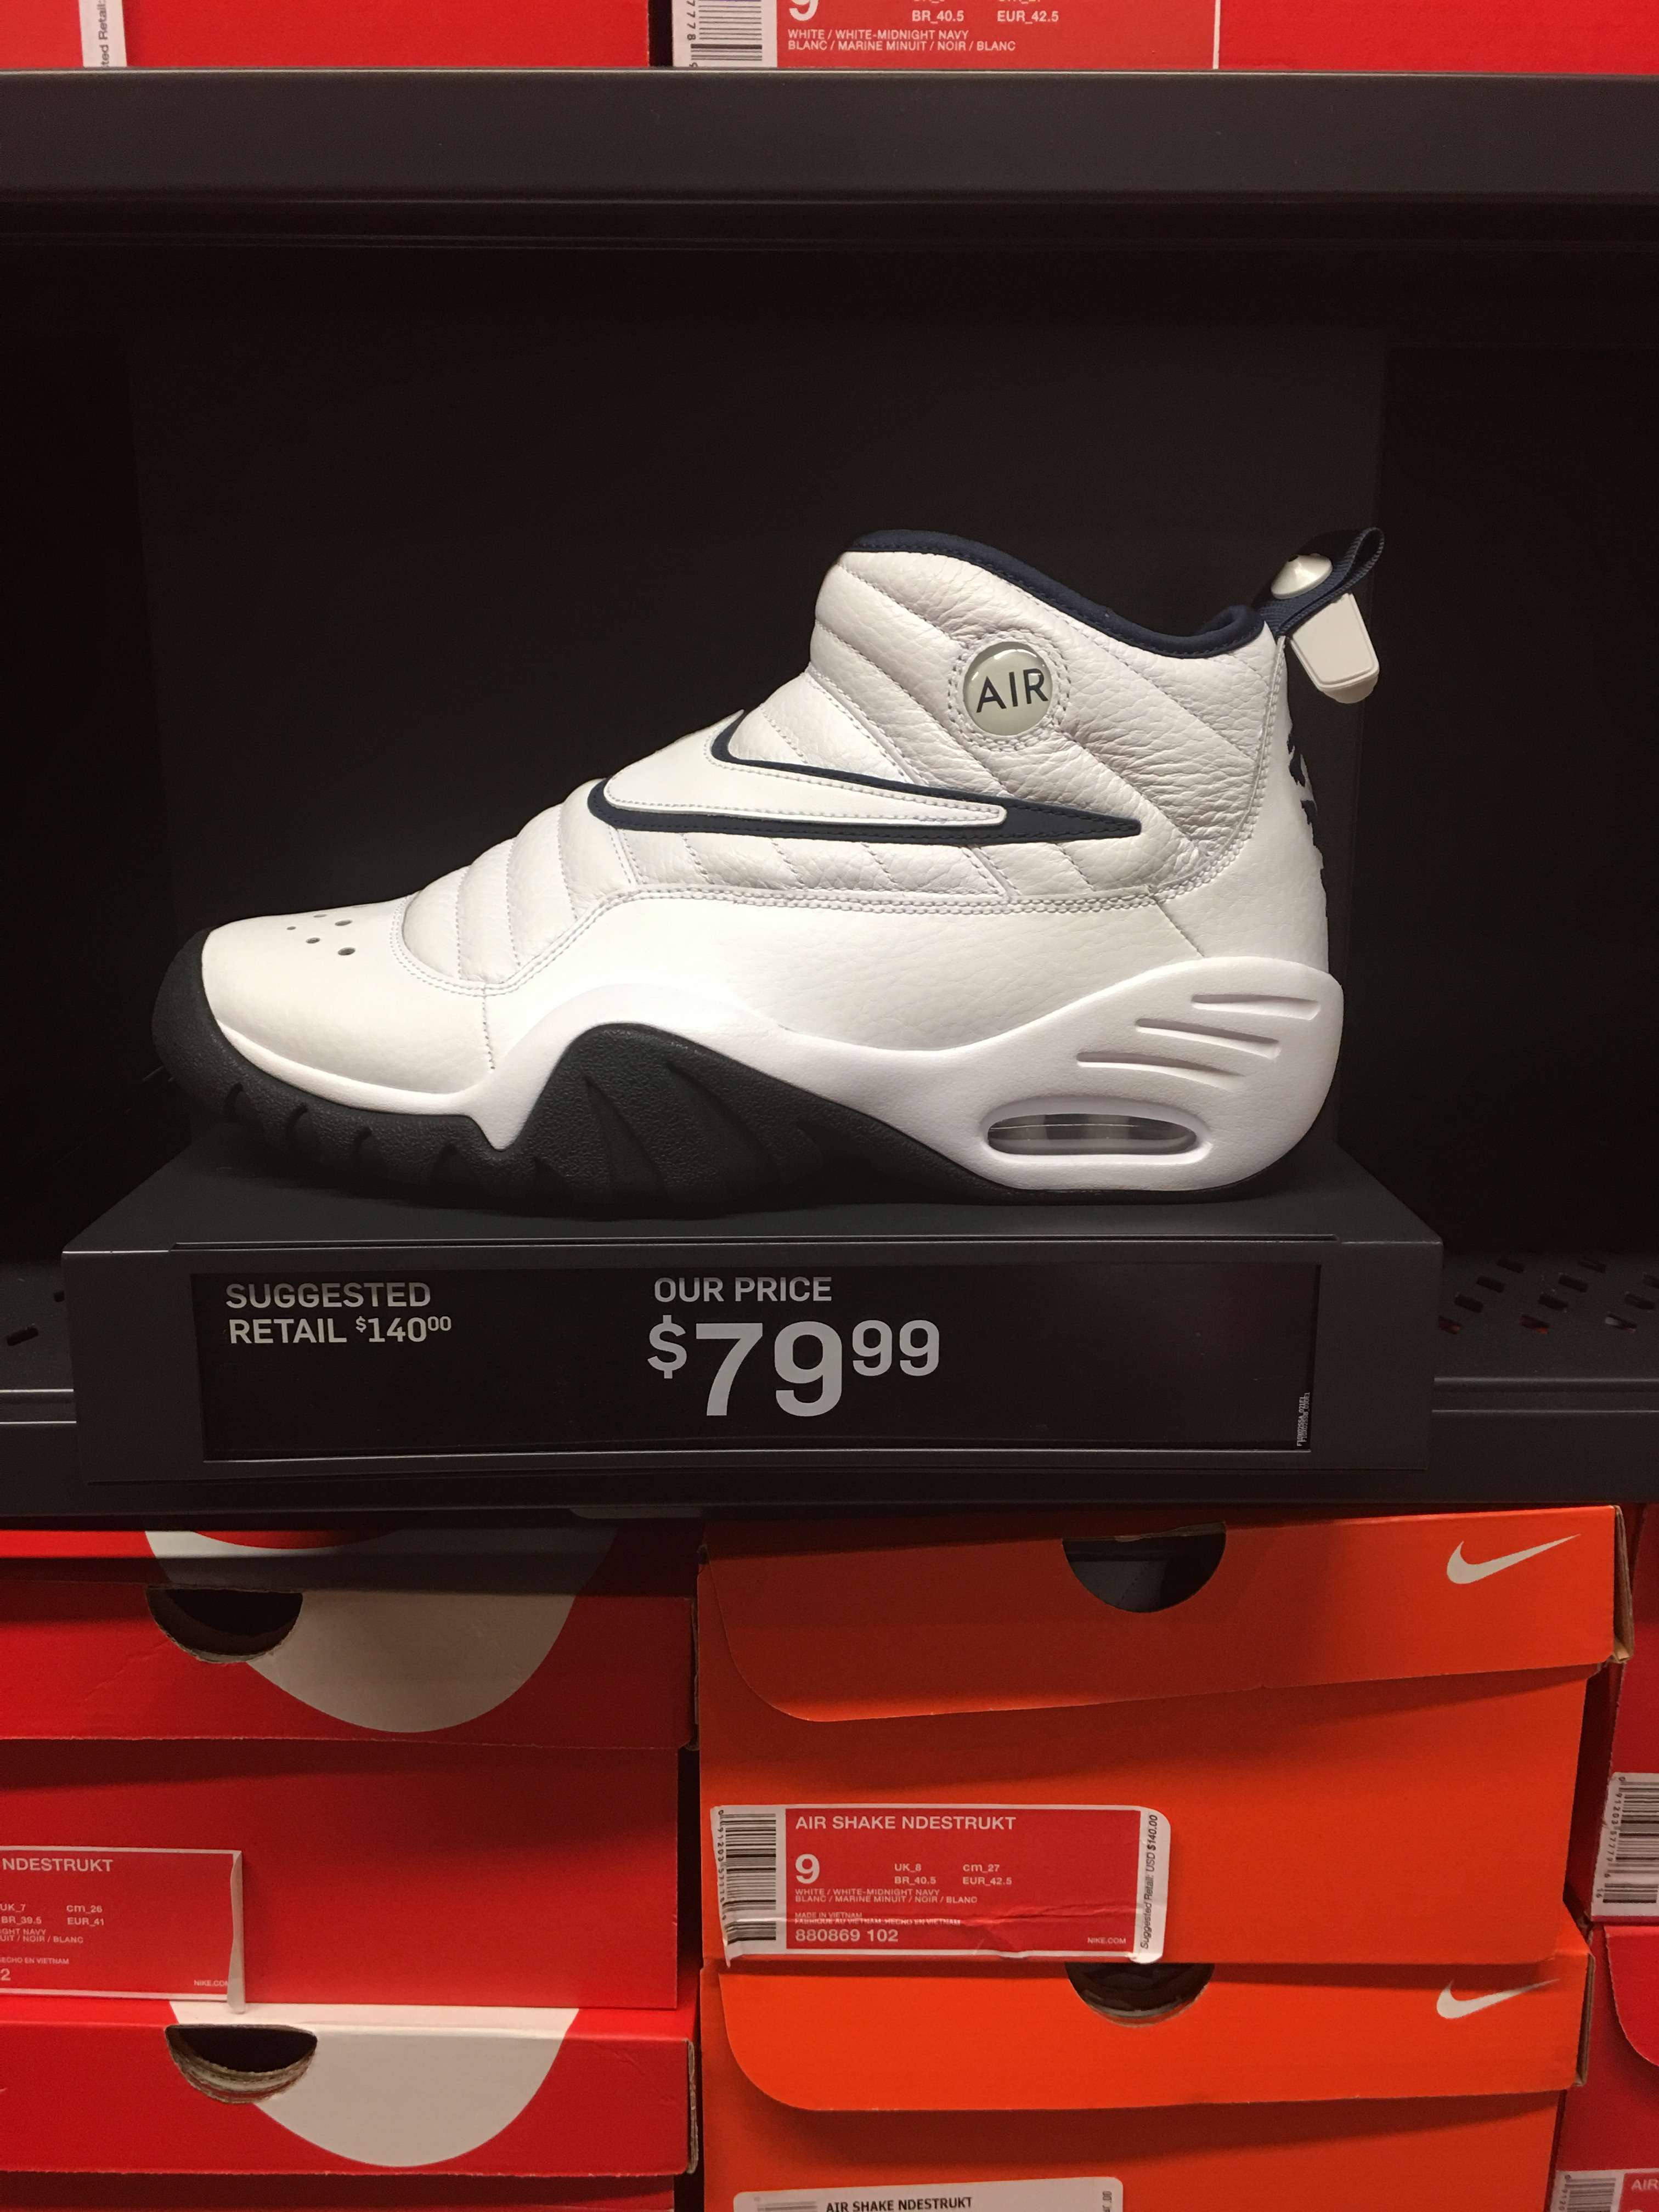 OFFICIAL JANUARY 2019 NIKE OUTLET/WEBSITE/STORE UPDATE THREAD | Page 7 | NikeTalk